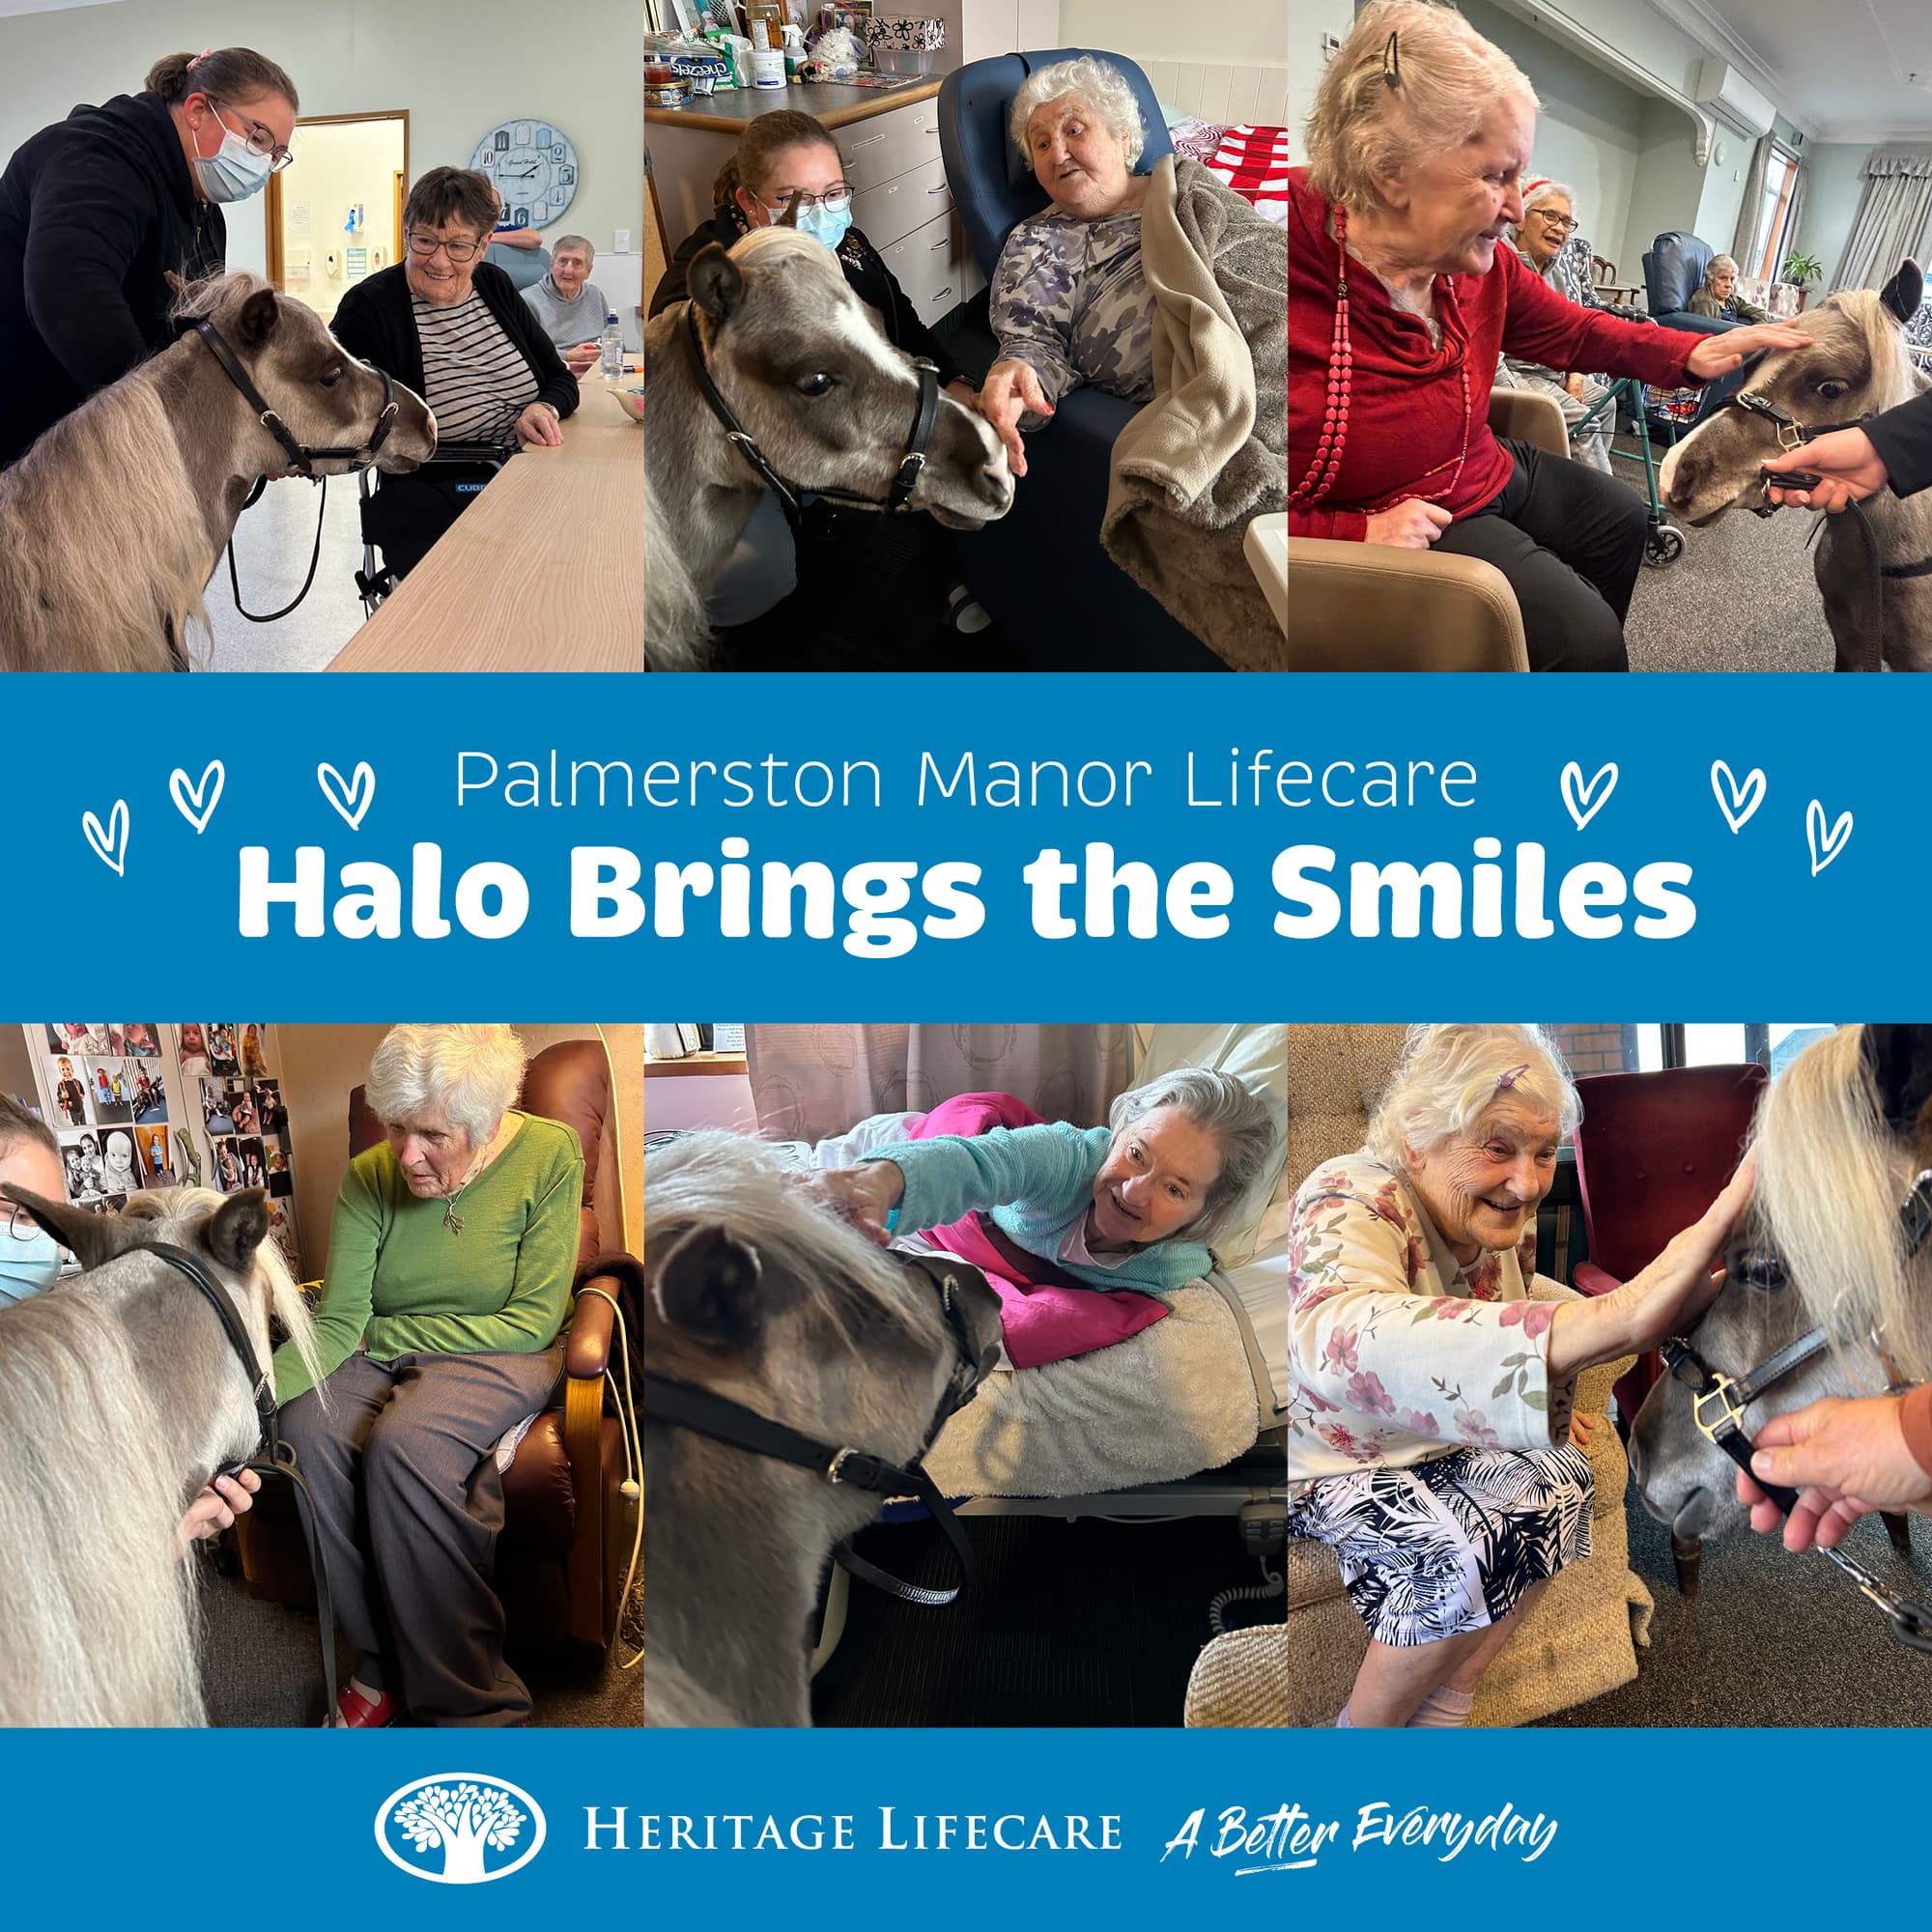 Halo Brings the Smiles